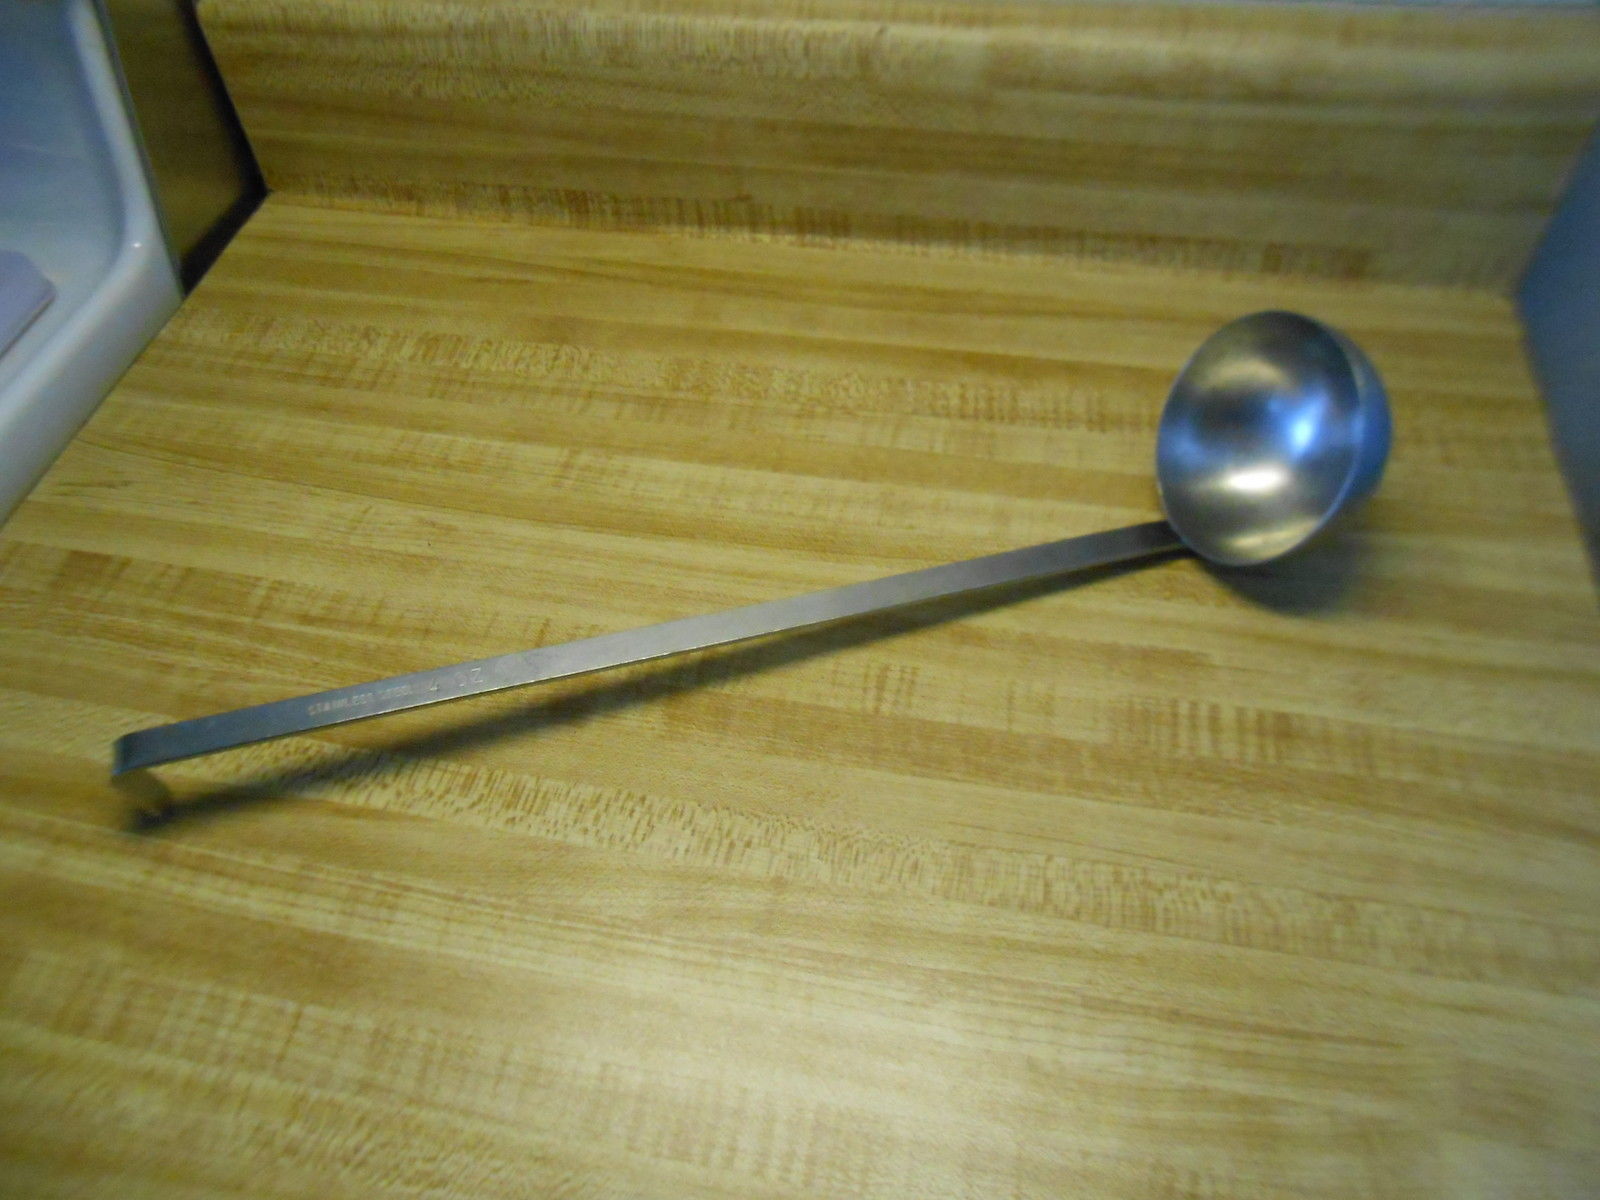 stainless steel ladle ~ 4oz size ladle NSF 14 inches long - $14.65